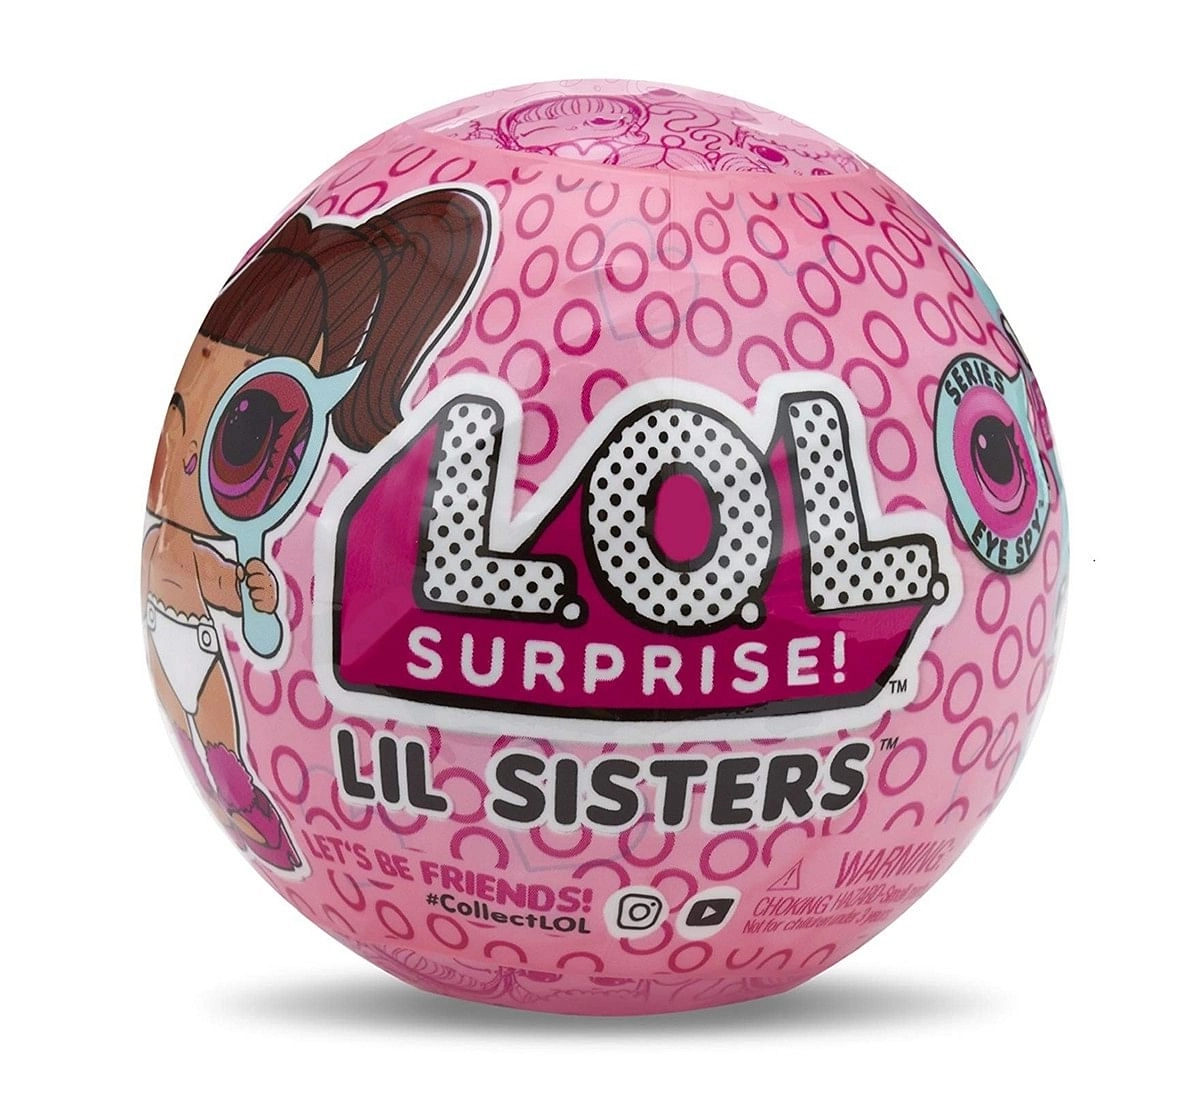 L.O.L. Surprise! Lil Sisters Ball Eye Spy Series Collectible Dolls for Kids age 3Y+ 